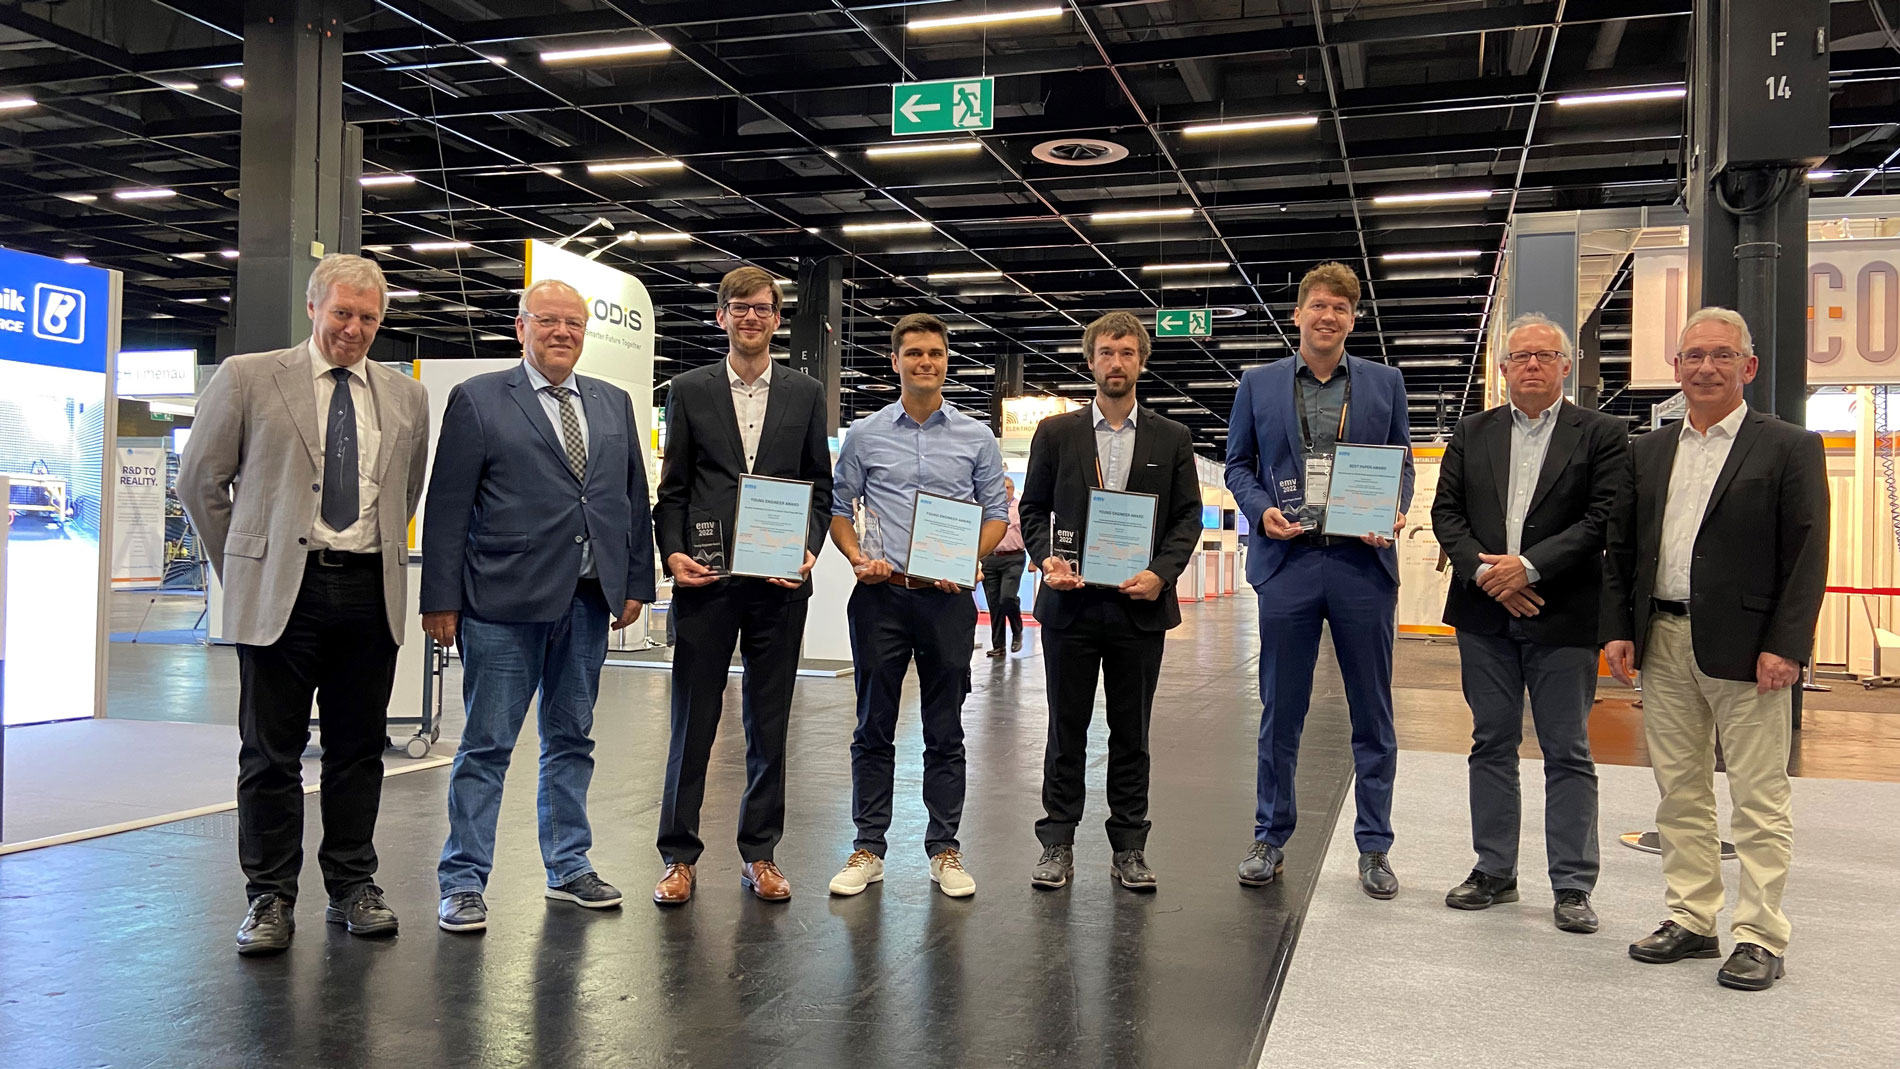 The winners of the Best Paper and the Young Engineer Awards and the jurors